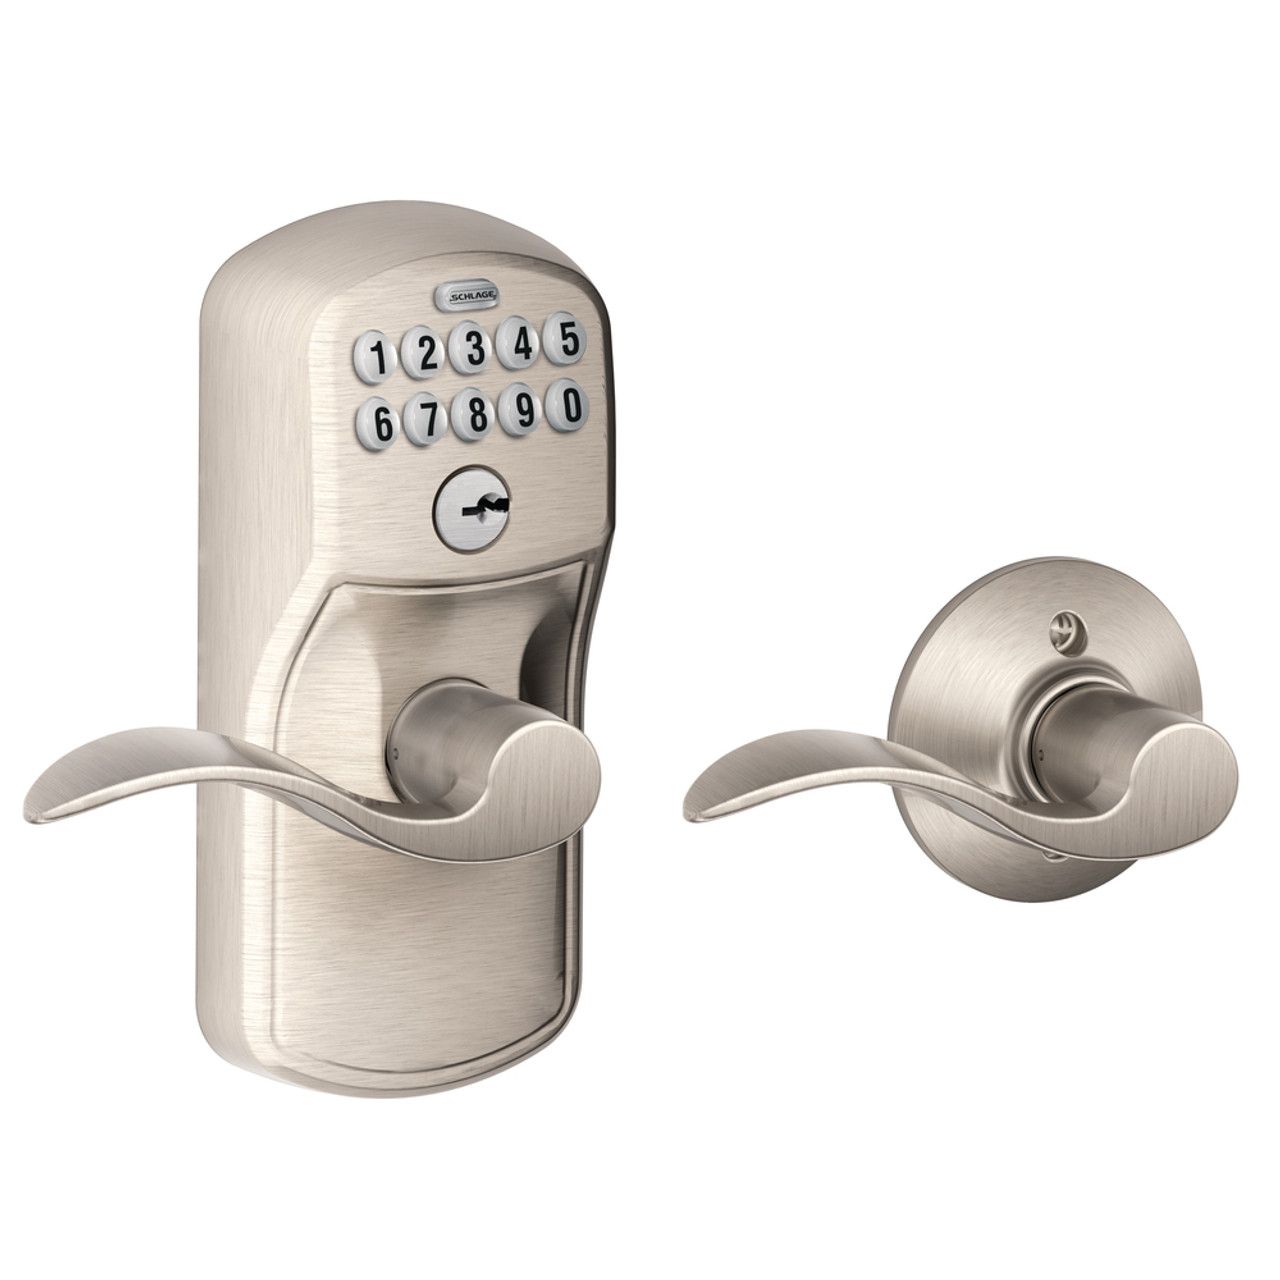 Schlage FE575 - Keypad Entry with Auto-Lock Plymouth Housing and Accent Levers